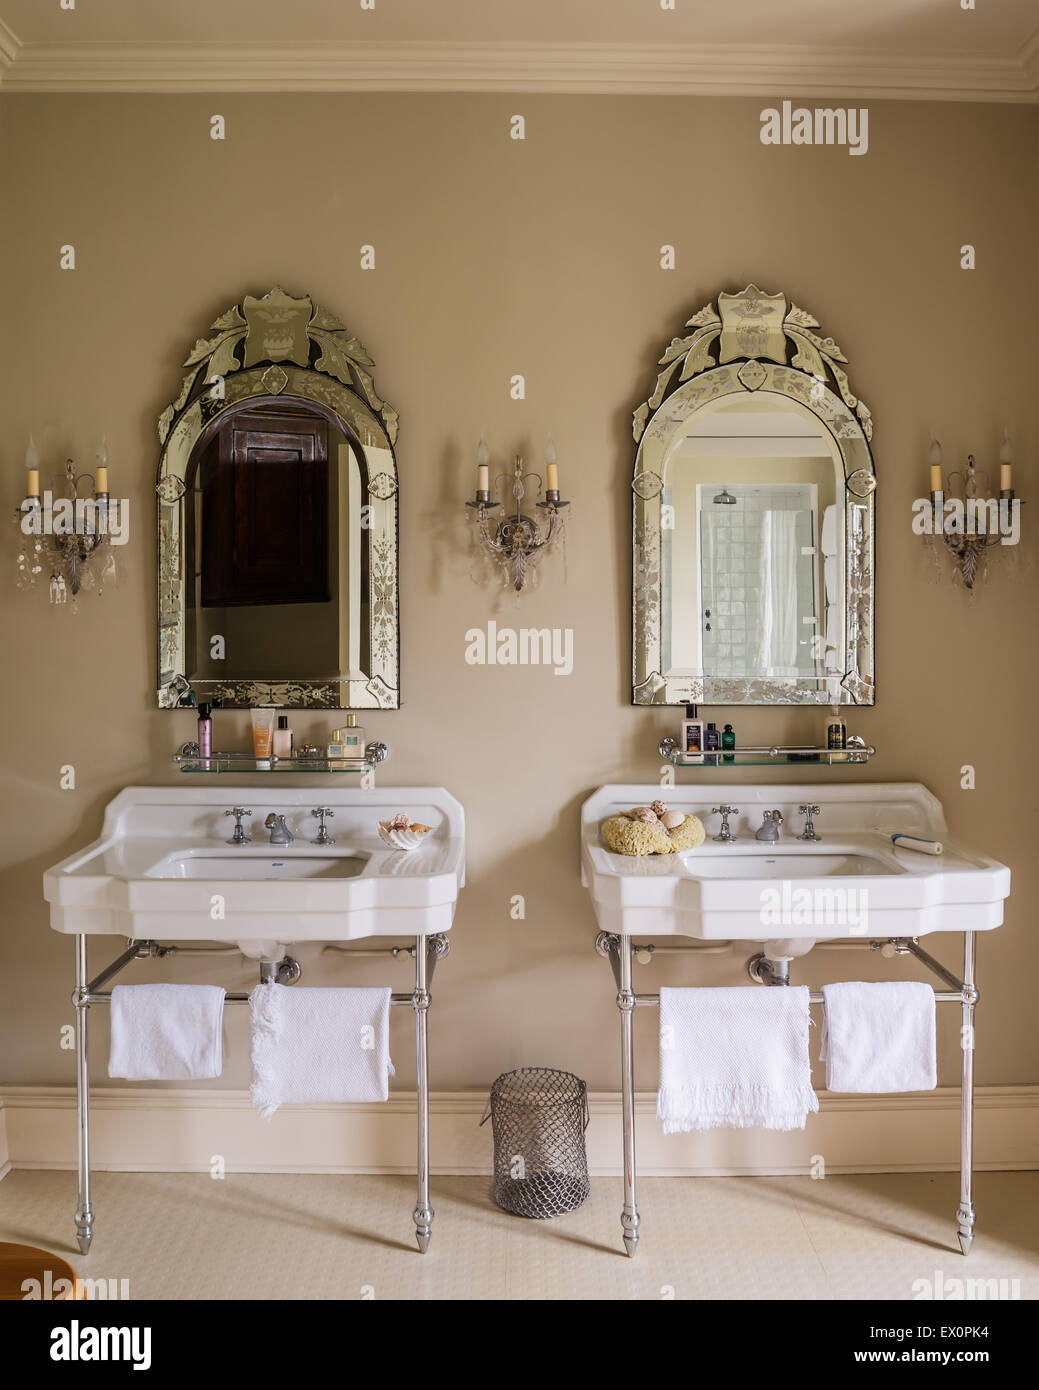 Matching basins from Cesame with glass framed mirrors from Christopher Wray Stock Photo